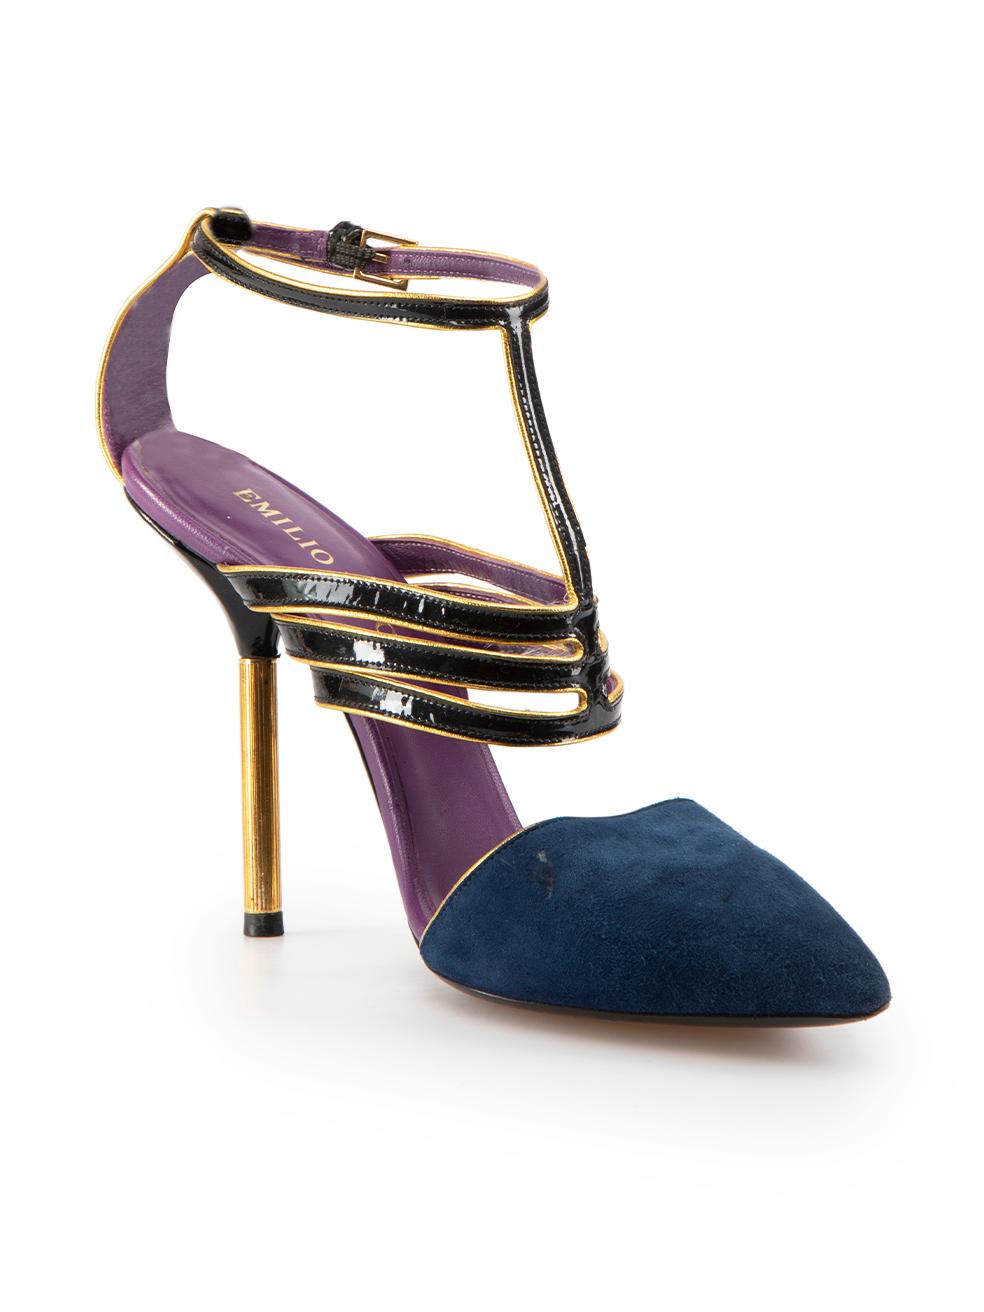 CONDITION is Very good. Minimal wear to heels is evident. Minimal wear to metal heel and metal buckle is slightly tarnished and small mark on suede on this used Emilio Pucci designer resale item.
 
Details
Navy
Suede
Heels
Point toe
Black patent